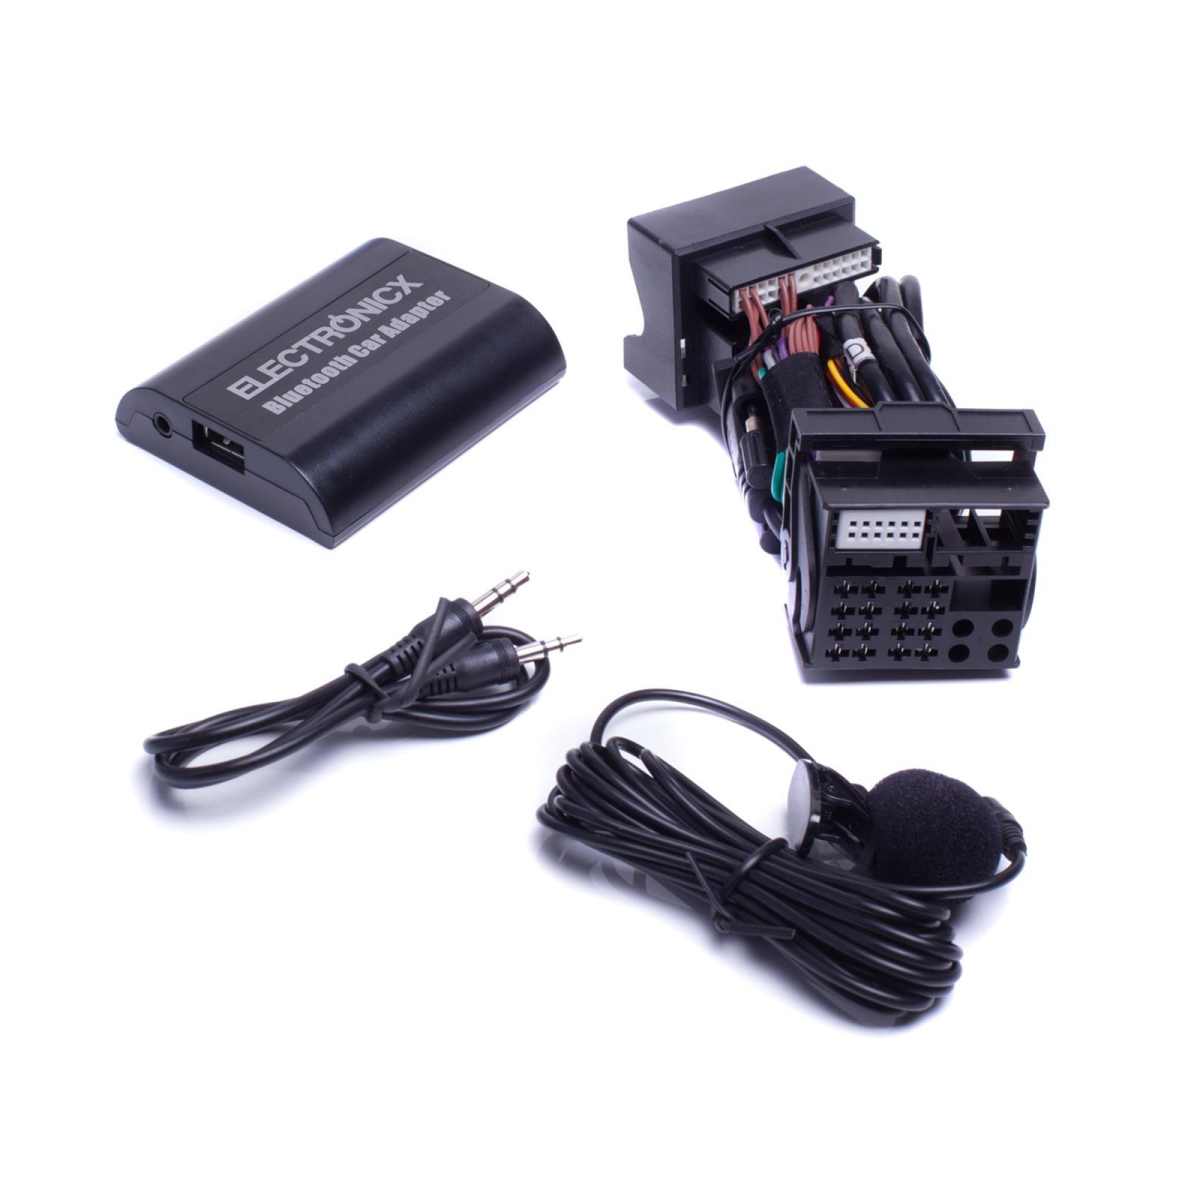 Adapter AUX Bluetooth Hands-free set Ford Quadlock 40+12 Pin